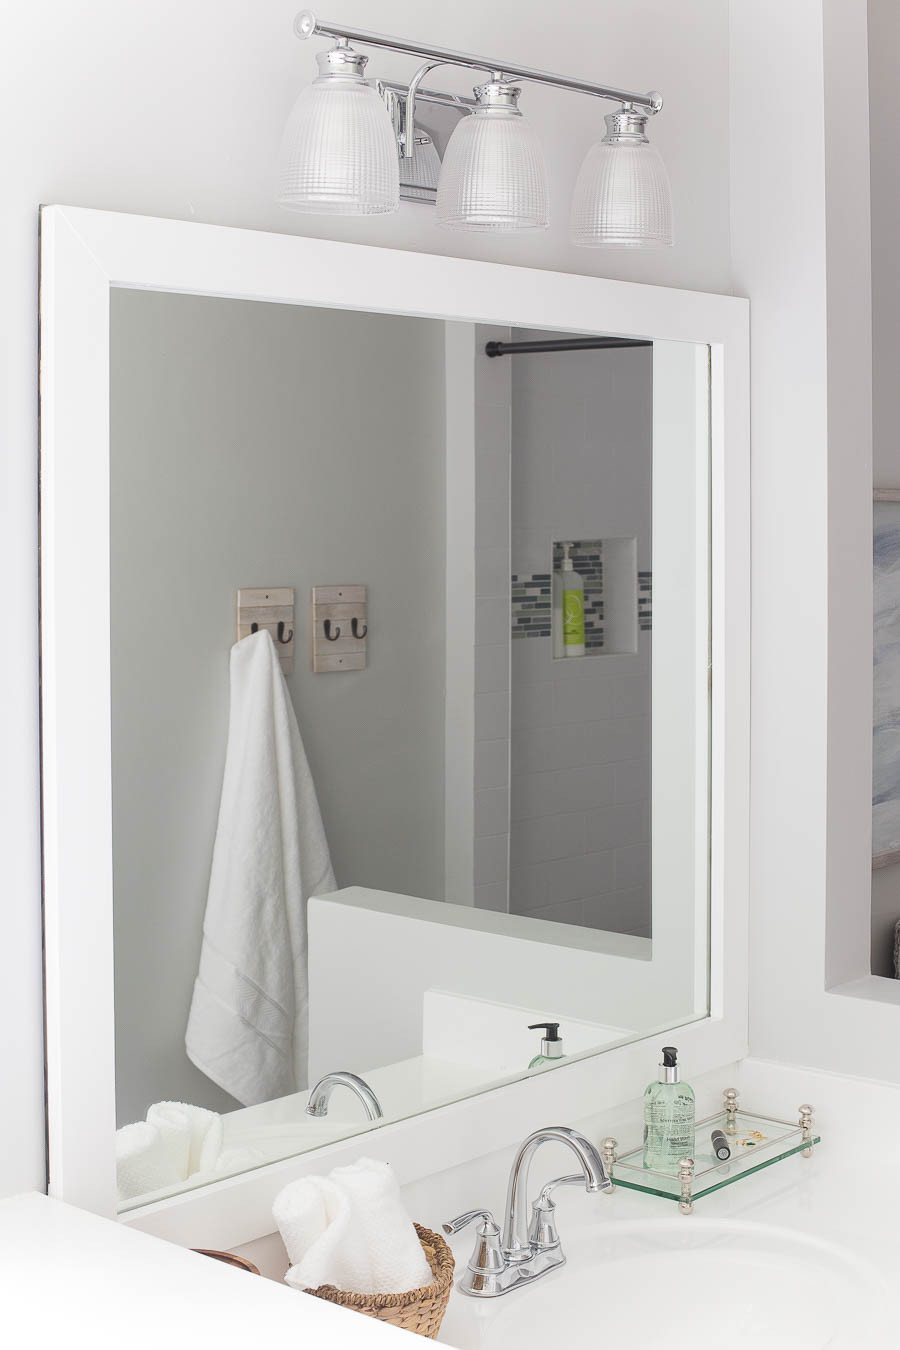 Bathroom Mirrors With Frames
 How to Frame a Bathroom Mirror Easy DIY project